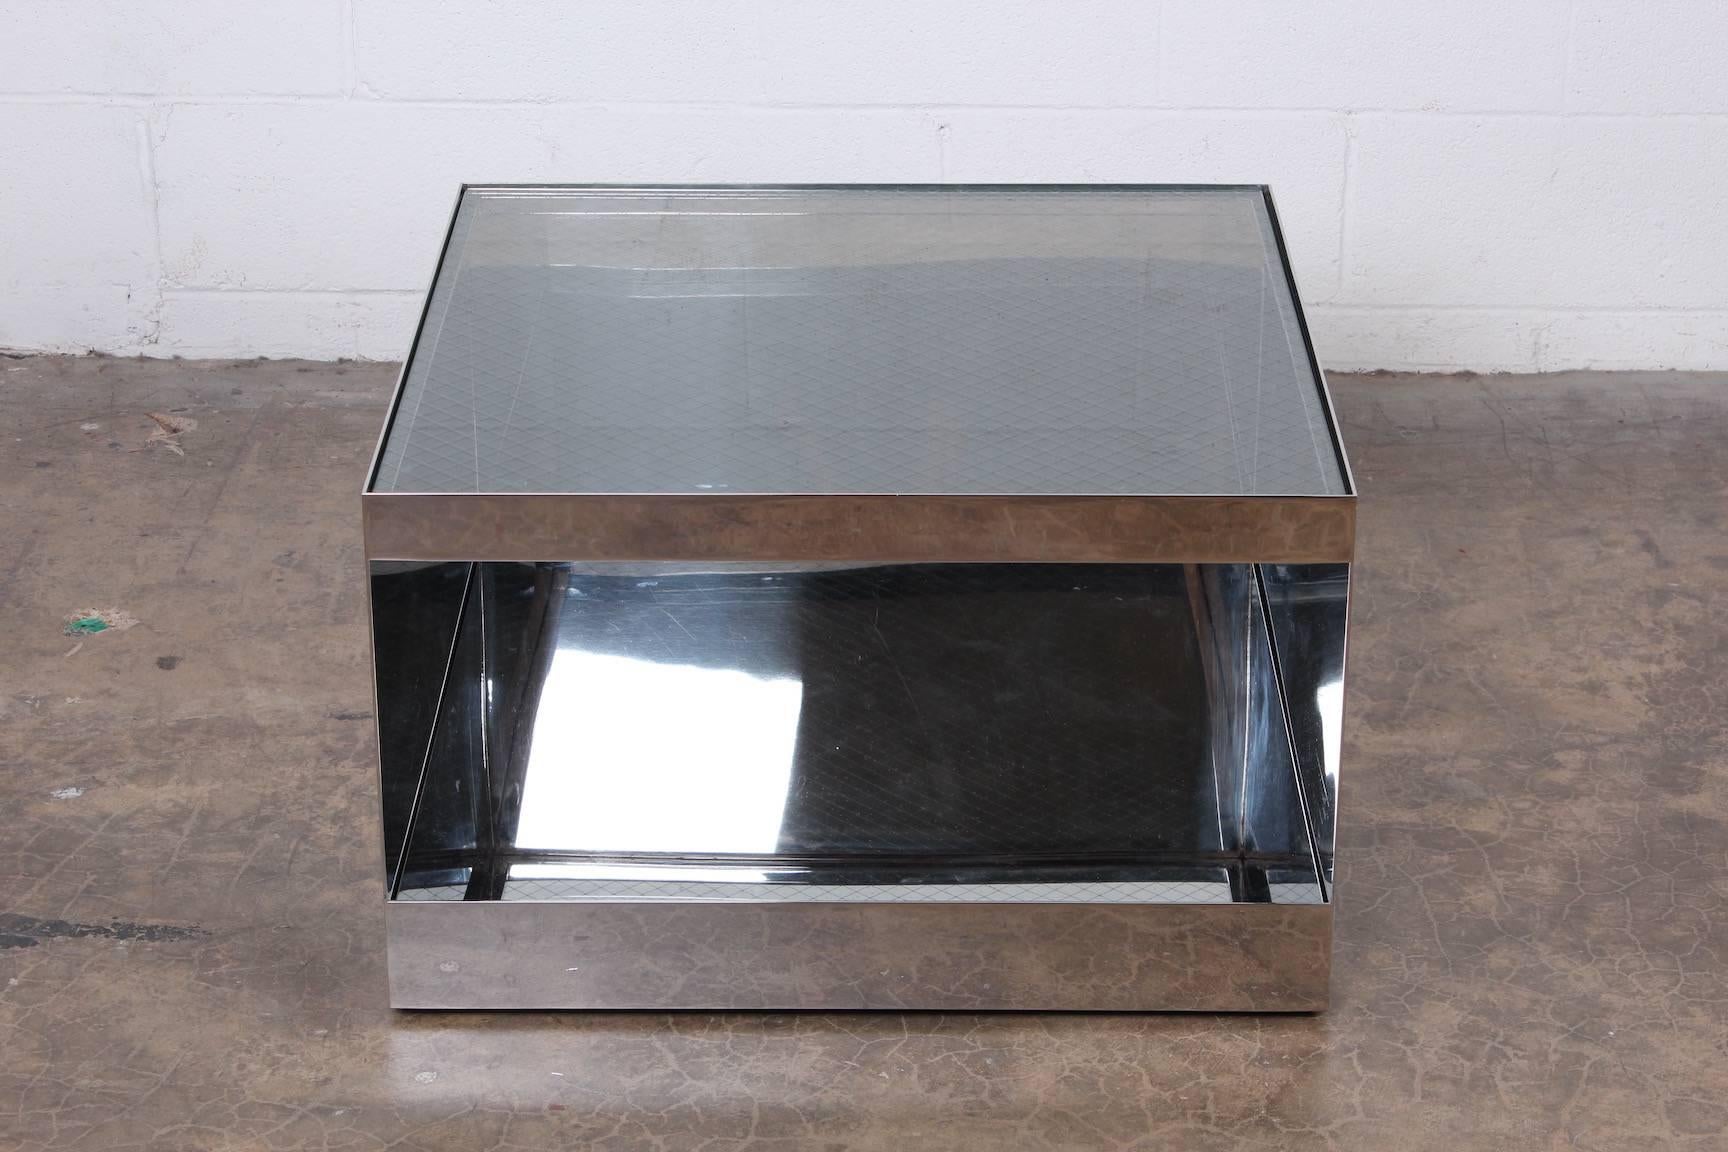 A polished stainless steel table with safety glass top on casters. Designed by Joe D'urso for Knoll.